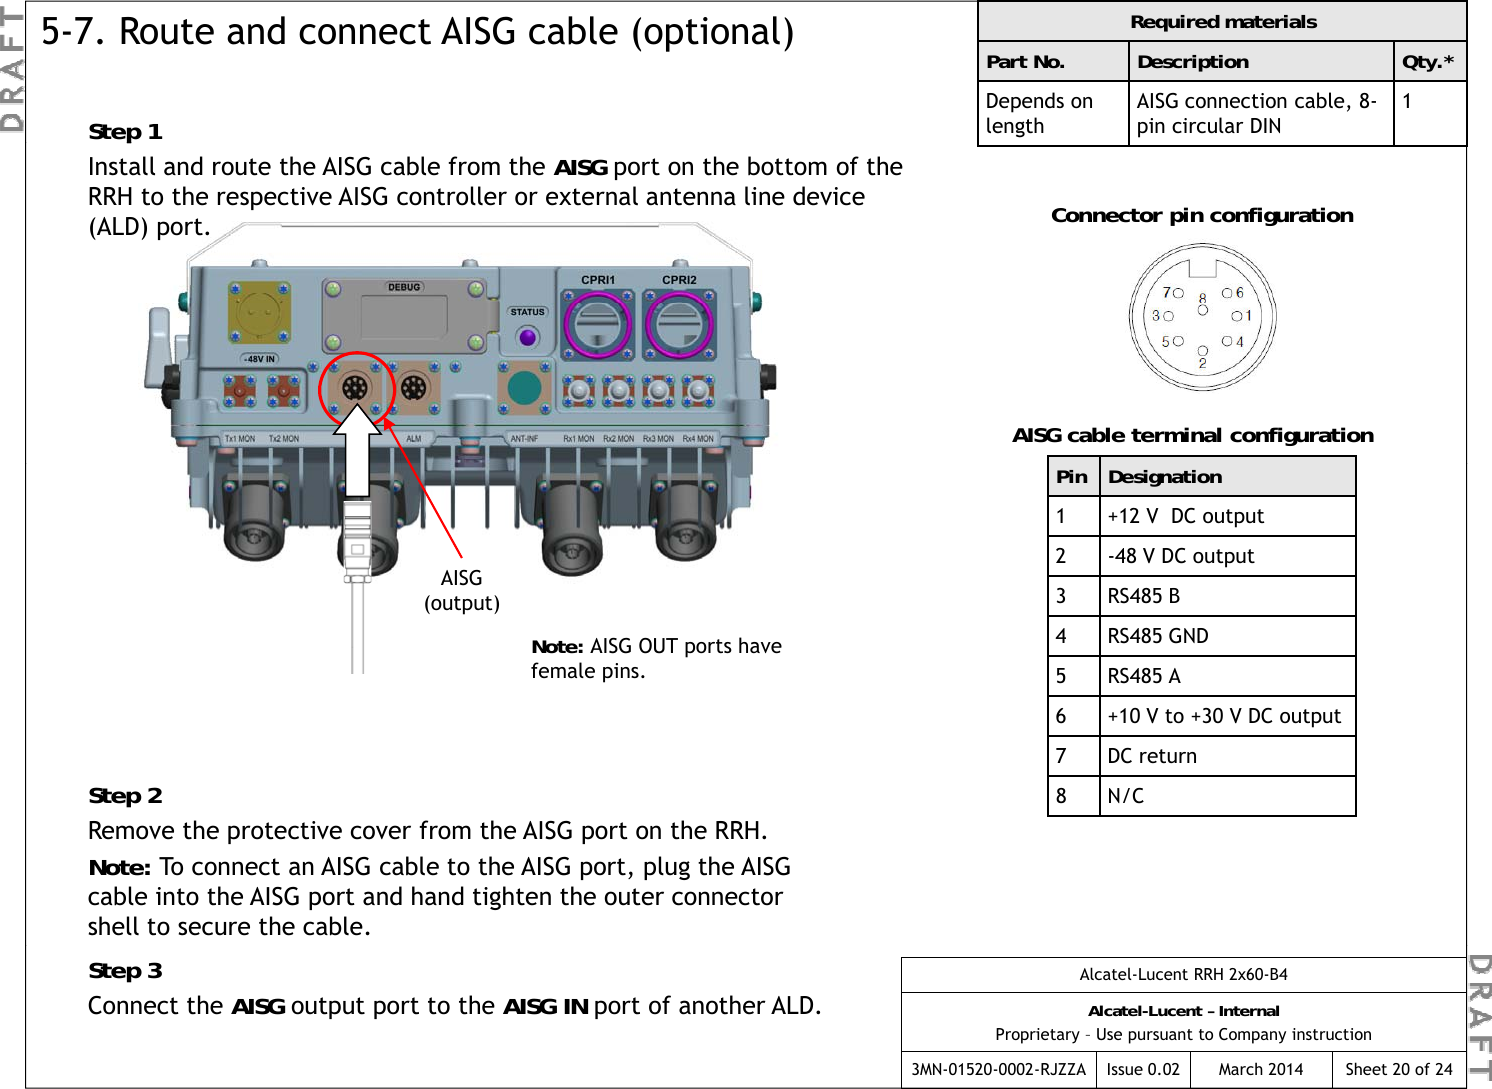 Step 1Required materialsPart No. Description Qty.*Depends on lengthAISG connection cable, 8-pin circular DIN15-7. Route and connect AISG cable (optional)pInstall and route the AISG cable from the AISG port on the bottom of the RRH to the respective AISG controller or external antenna line device (ALD) port. Connector pin configurationAISG cable terminal configurationAISG(output)Pin Designation1 +12 V  DC output2 -48 V DC output3 RS485 BS 2Note: AISG OUT ports have female pins.4 RS485 GND5 RS485 A6 +10 V to +30 V DC output7 DC returnStep 2Remove the protective cover from the AISG port on the RRH.Note: To connect an AISG cable to the AISG port, plug the AISG cable into the AISG port and hand tighten the outer connector shell to secure the cable.8 N/CAlcatel-Lucent RRH 2x60-B4Alcatel-Lucent – InternalProprietary – Use pursuant to Company instruction3MN-01520-0002-RJZZA Issue 0.02 March 2014 Sheet 20 of 24Step 3Connect the AISG output port to the AISG IN port of another ALD.